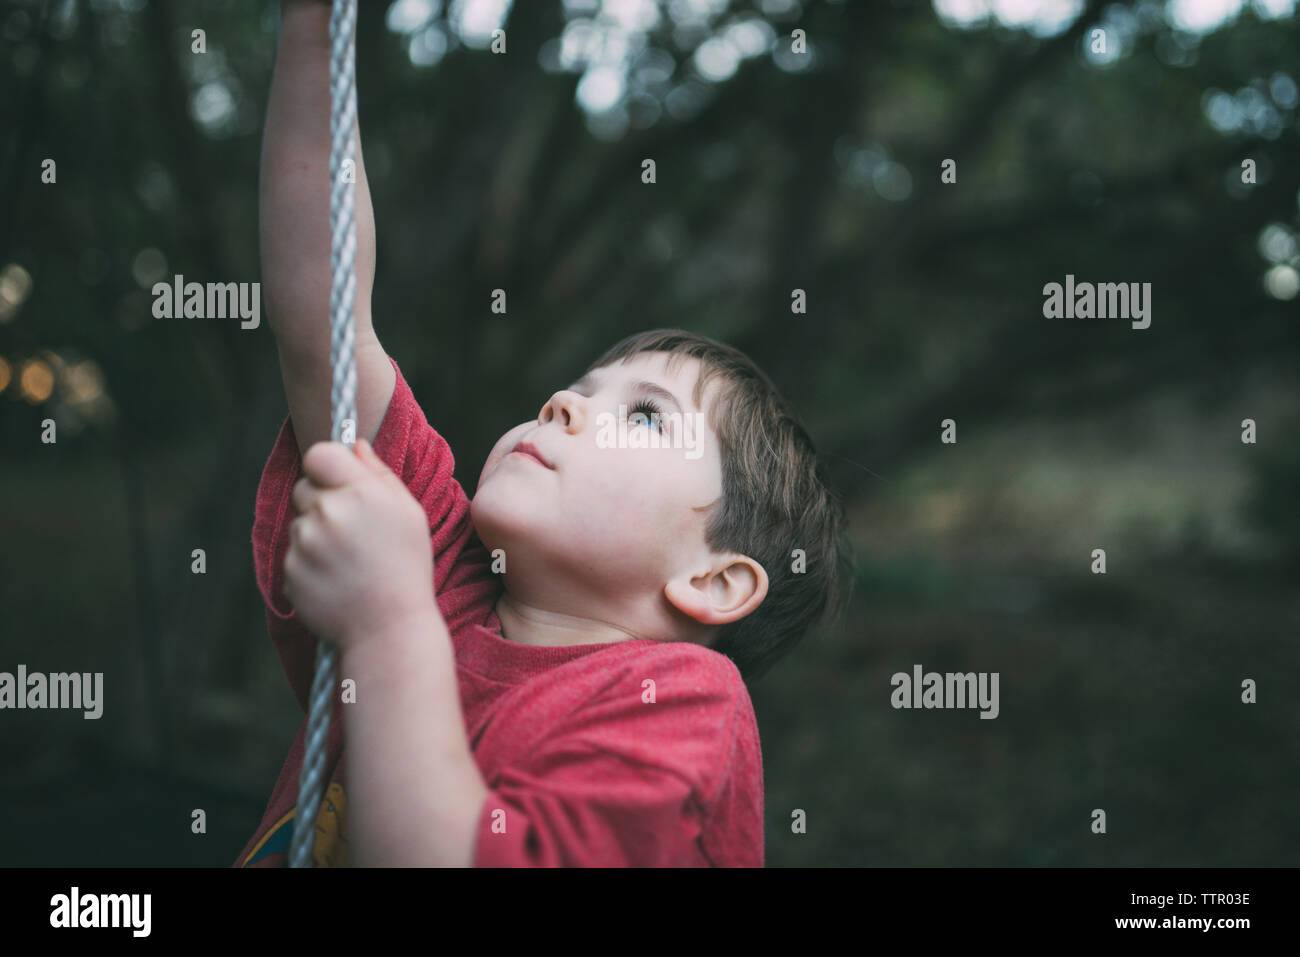 Cute boy looking up while climbing rope at playground Stock Photo